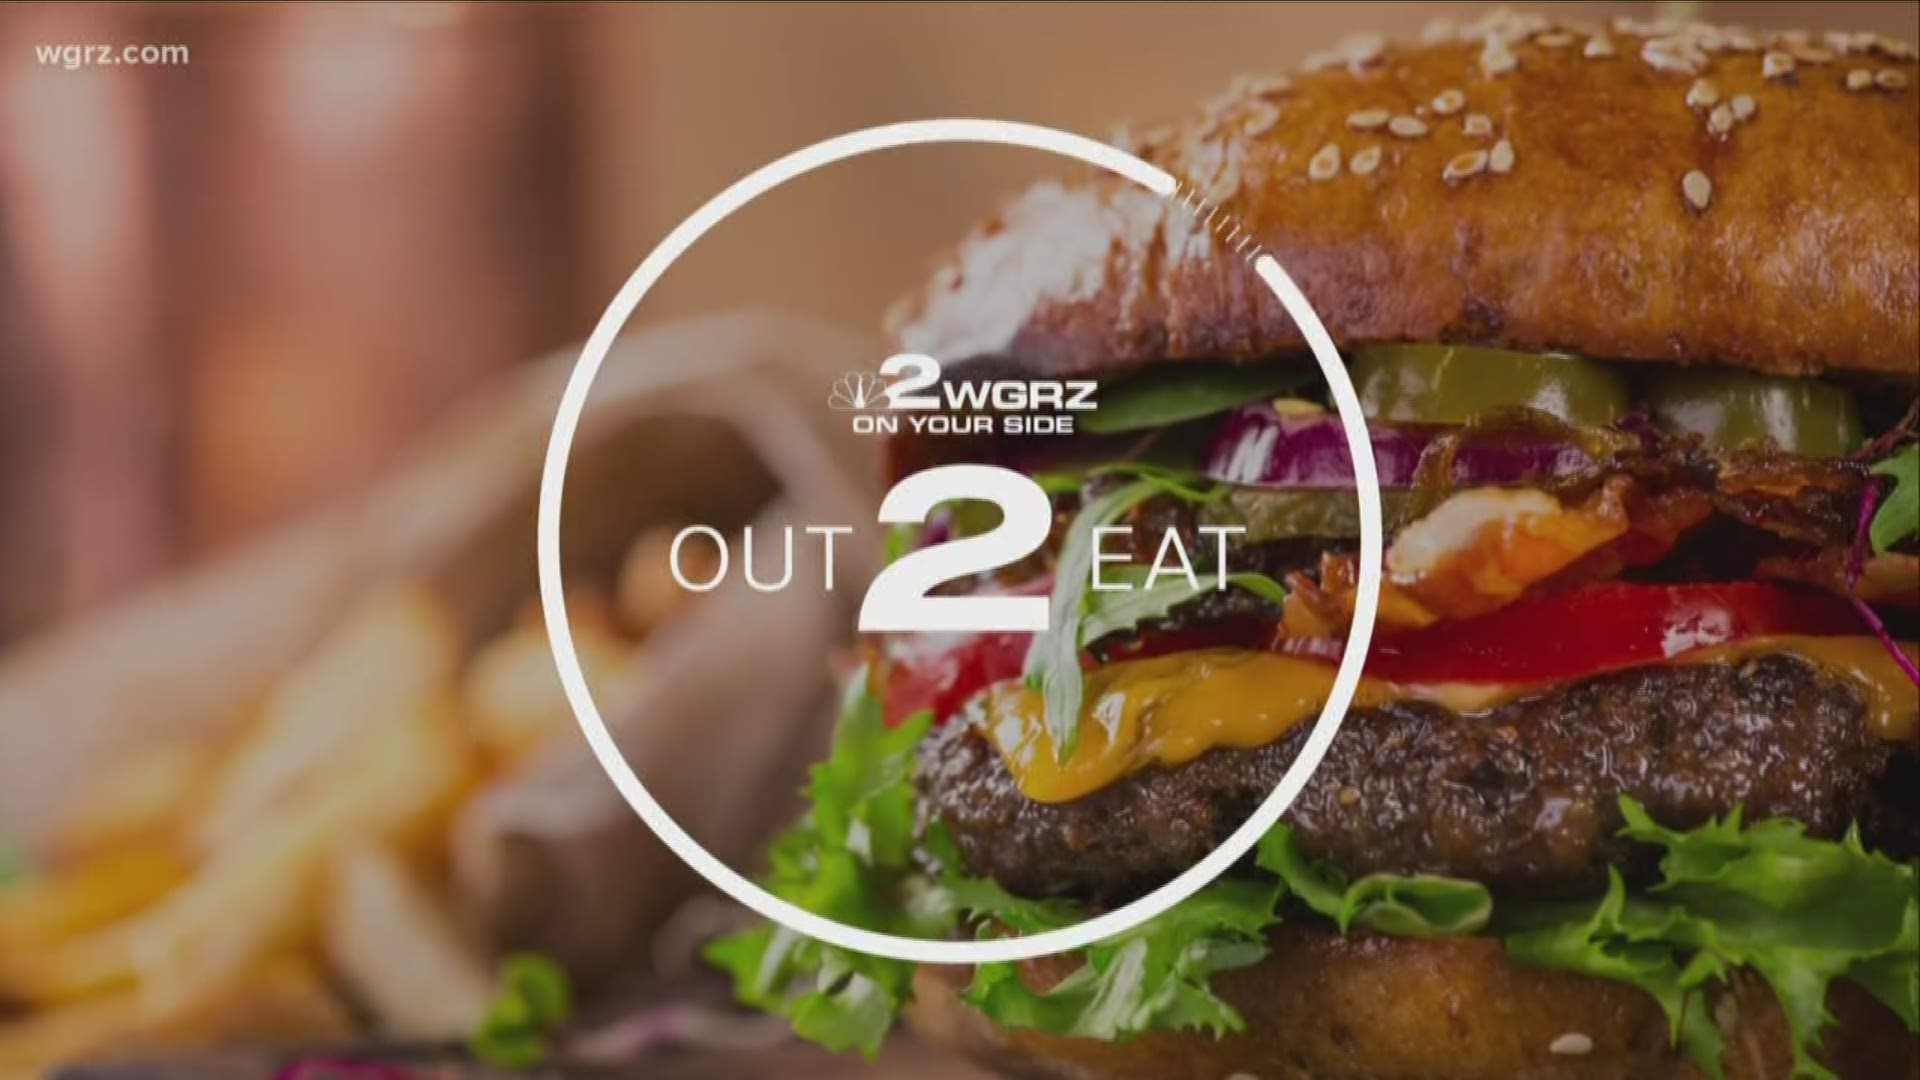 2 On Your Side's Lauren Hall takes a look at local restaurants in this 'Out 2 Eat' special.